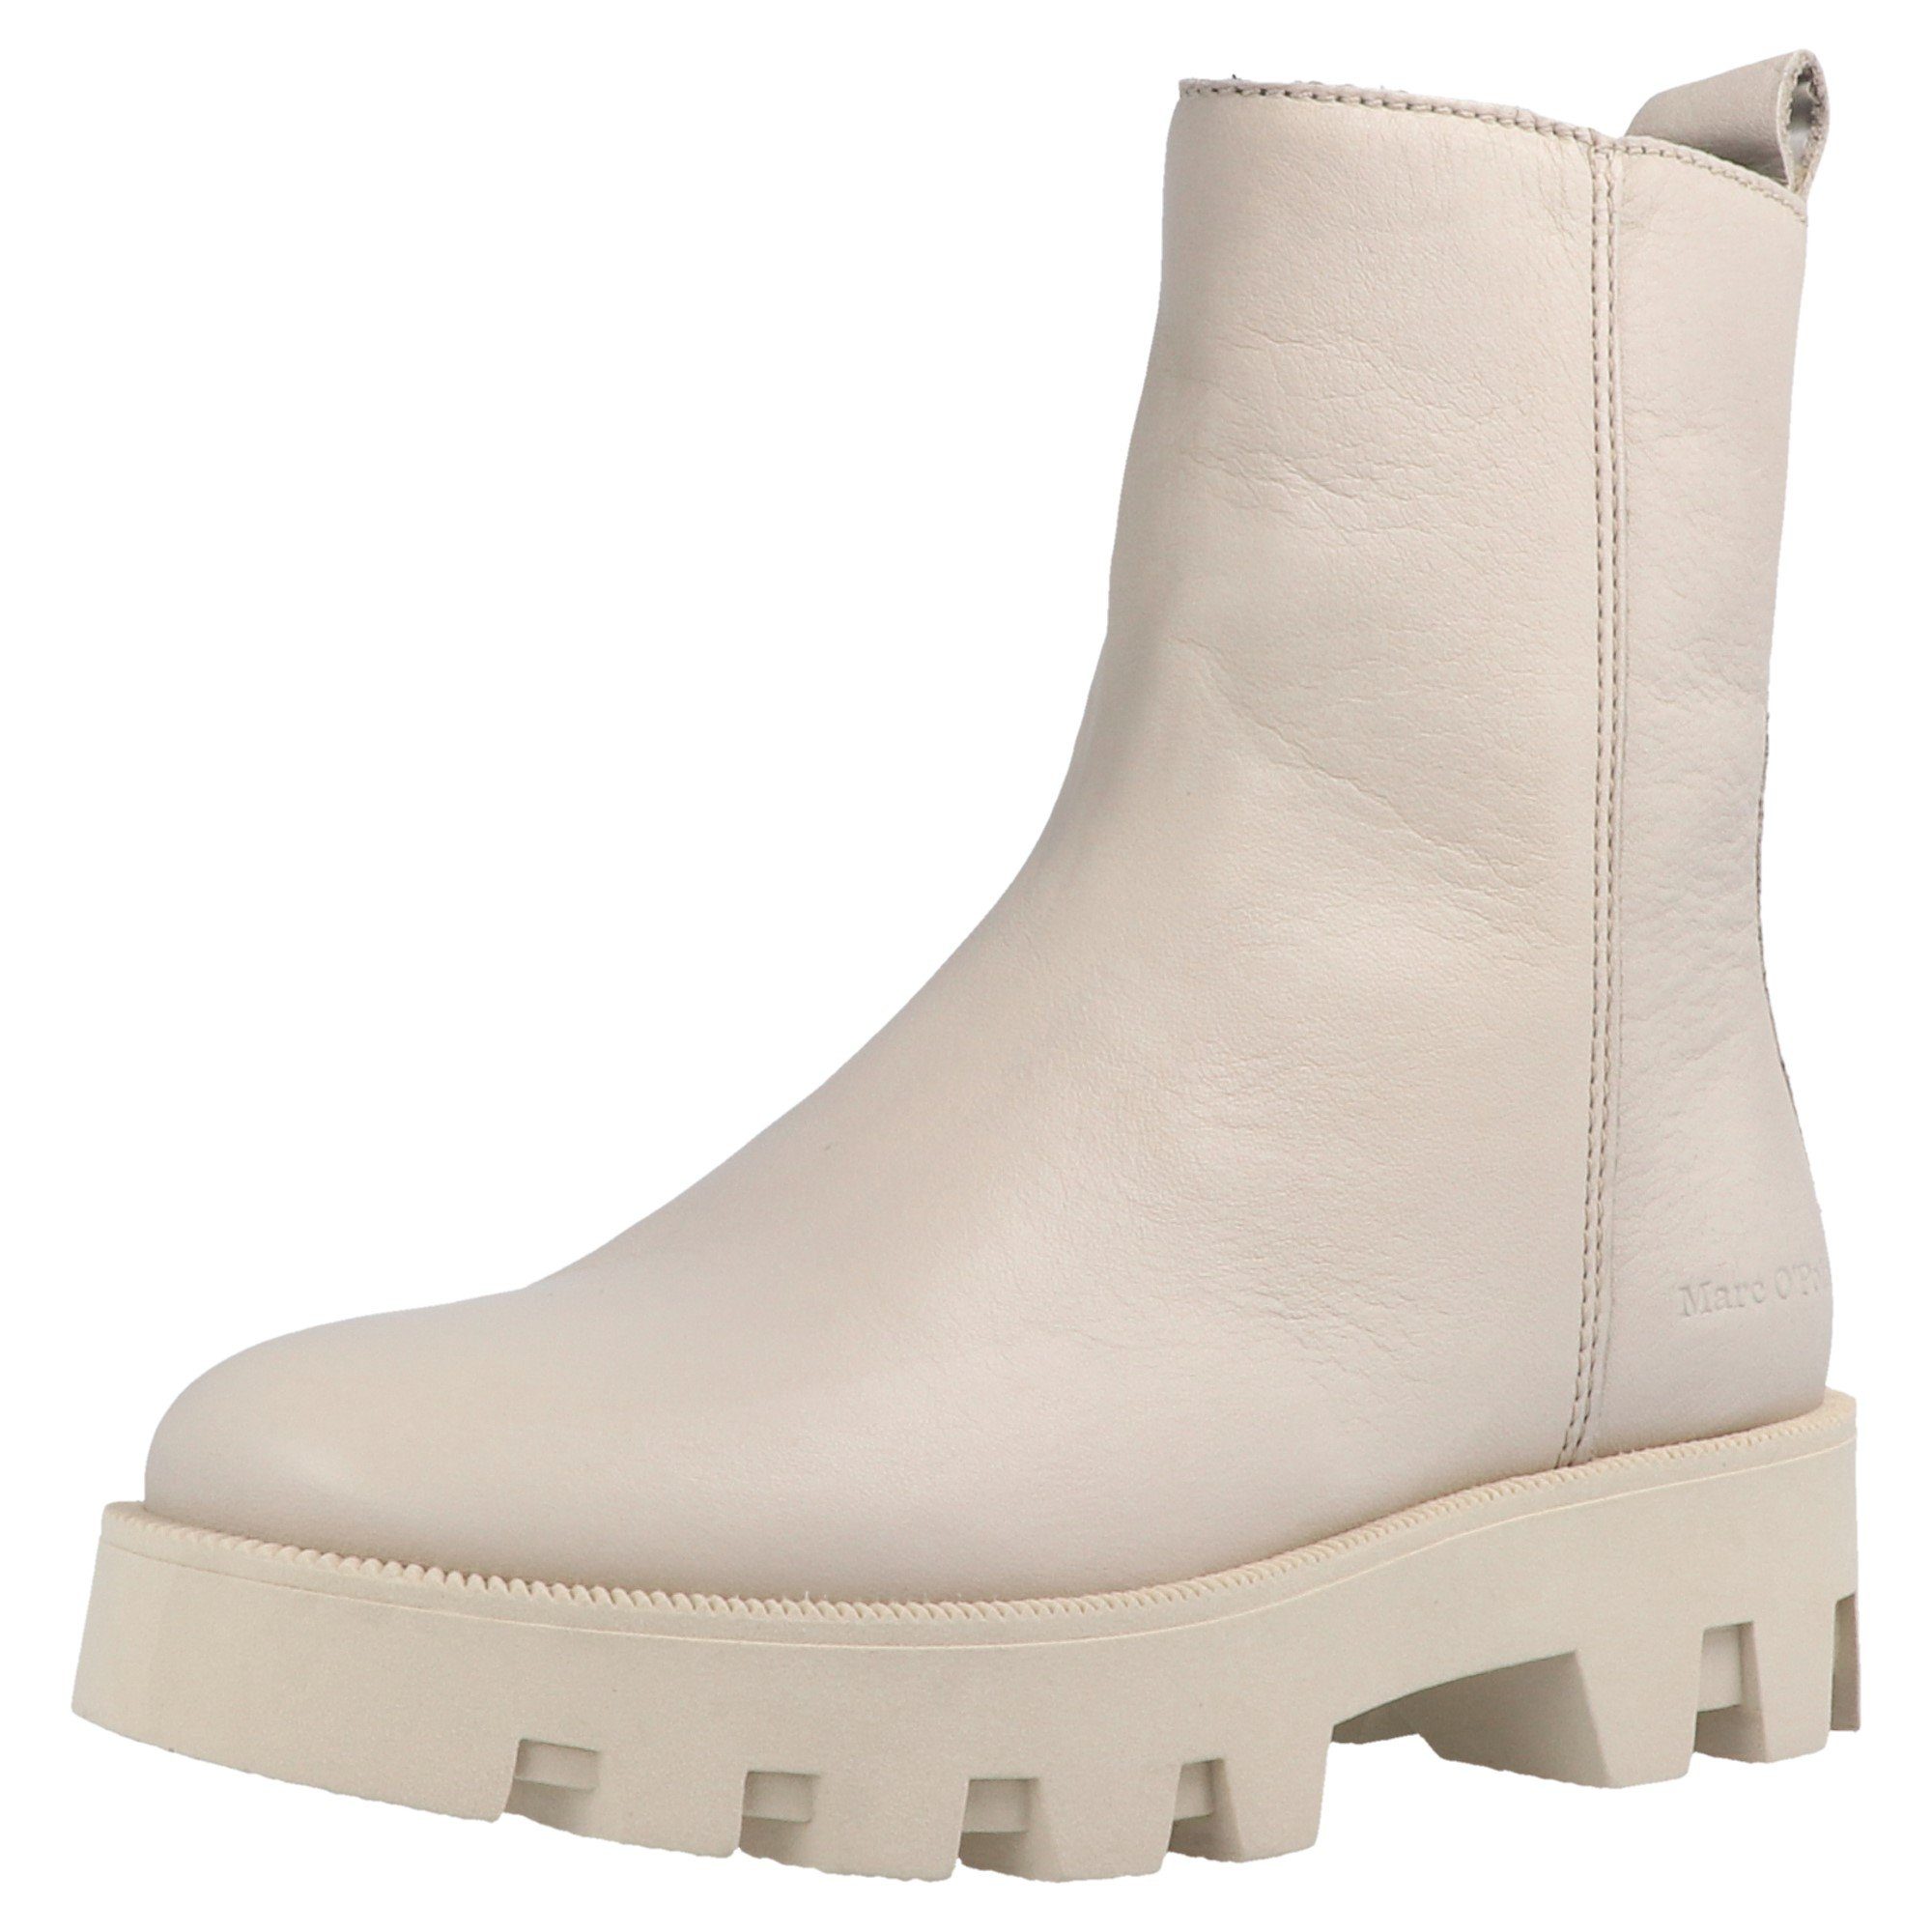 Marc O'Polo Boots online kaufen | OTTO